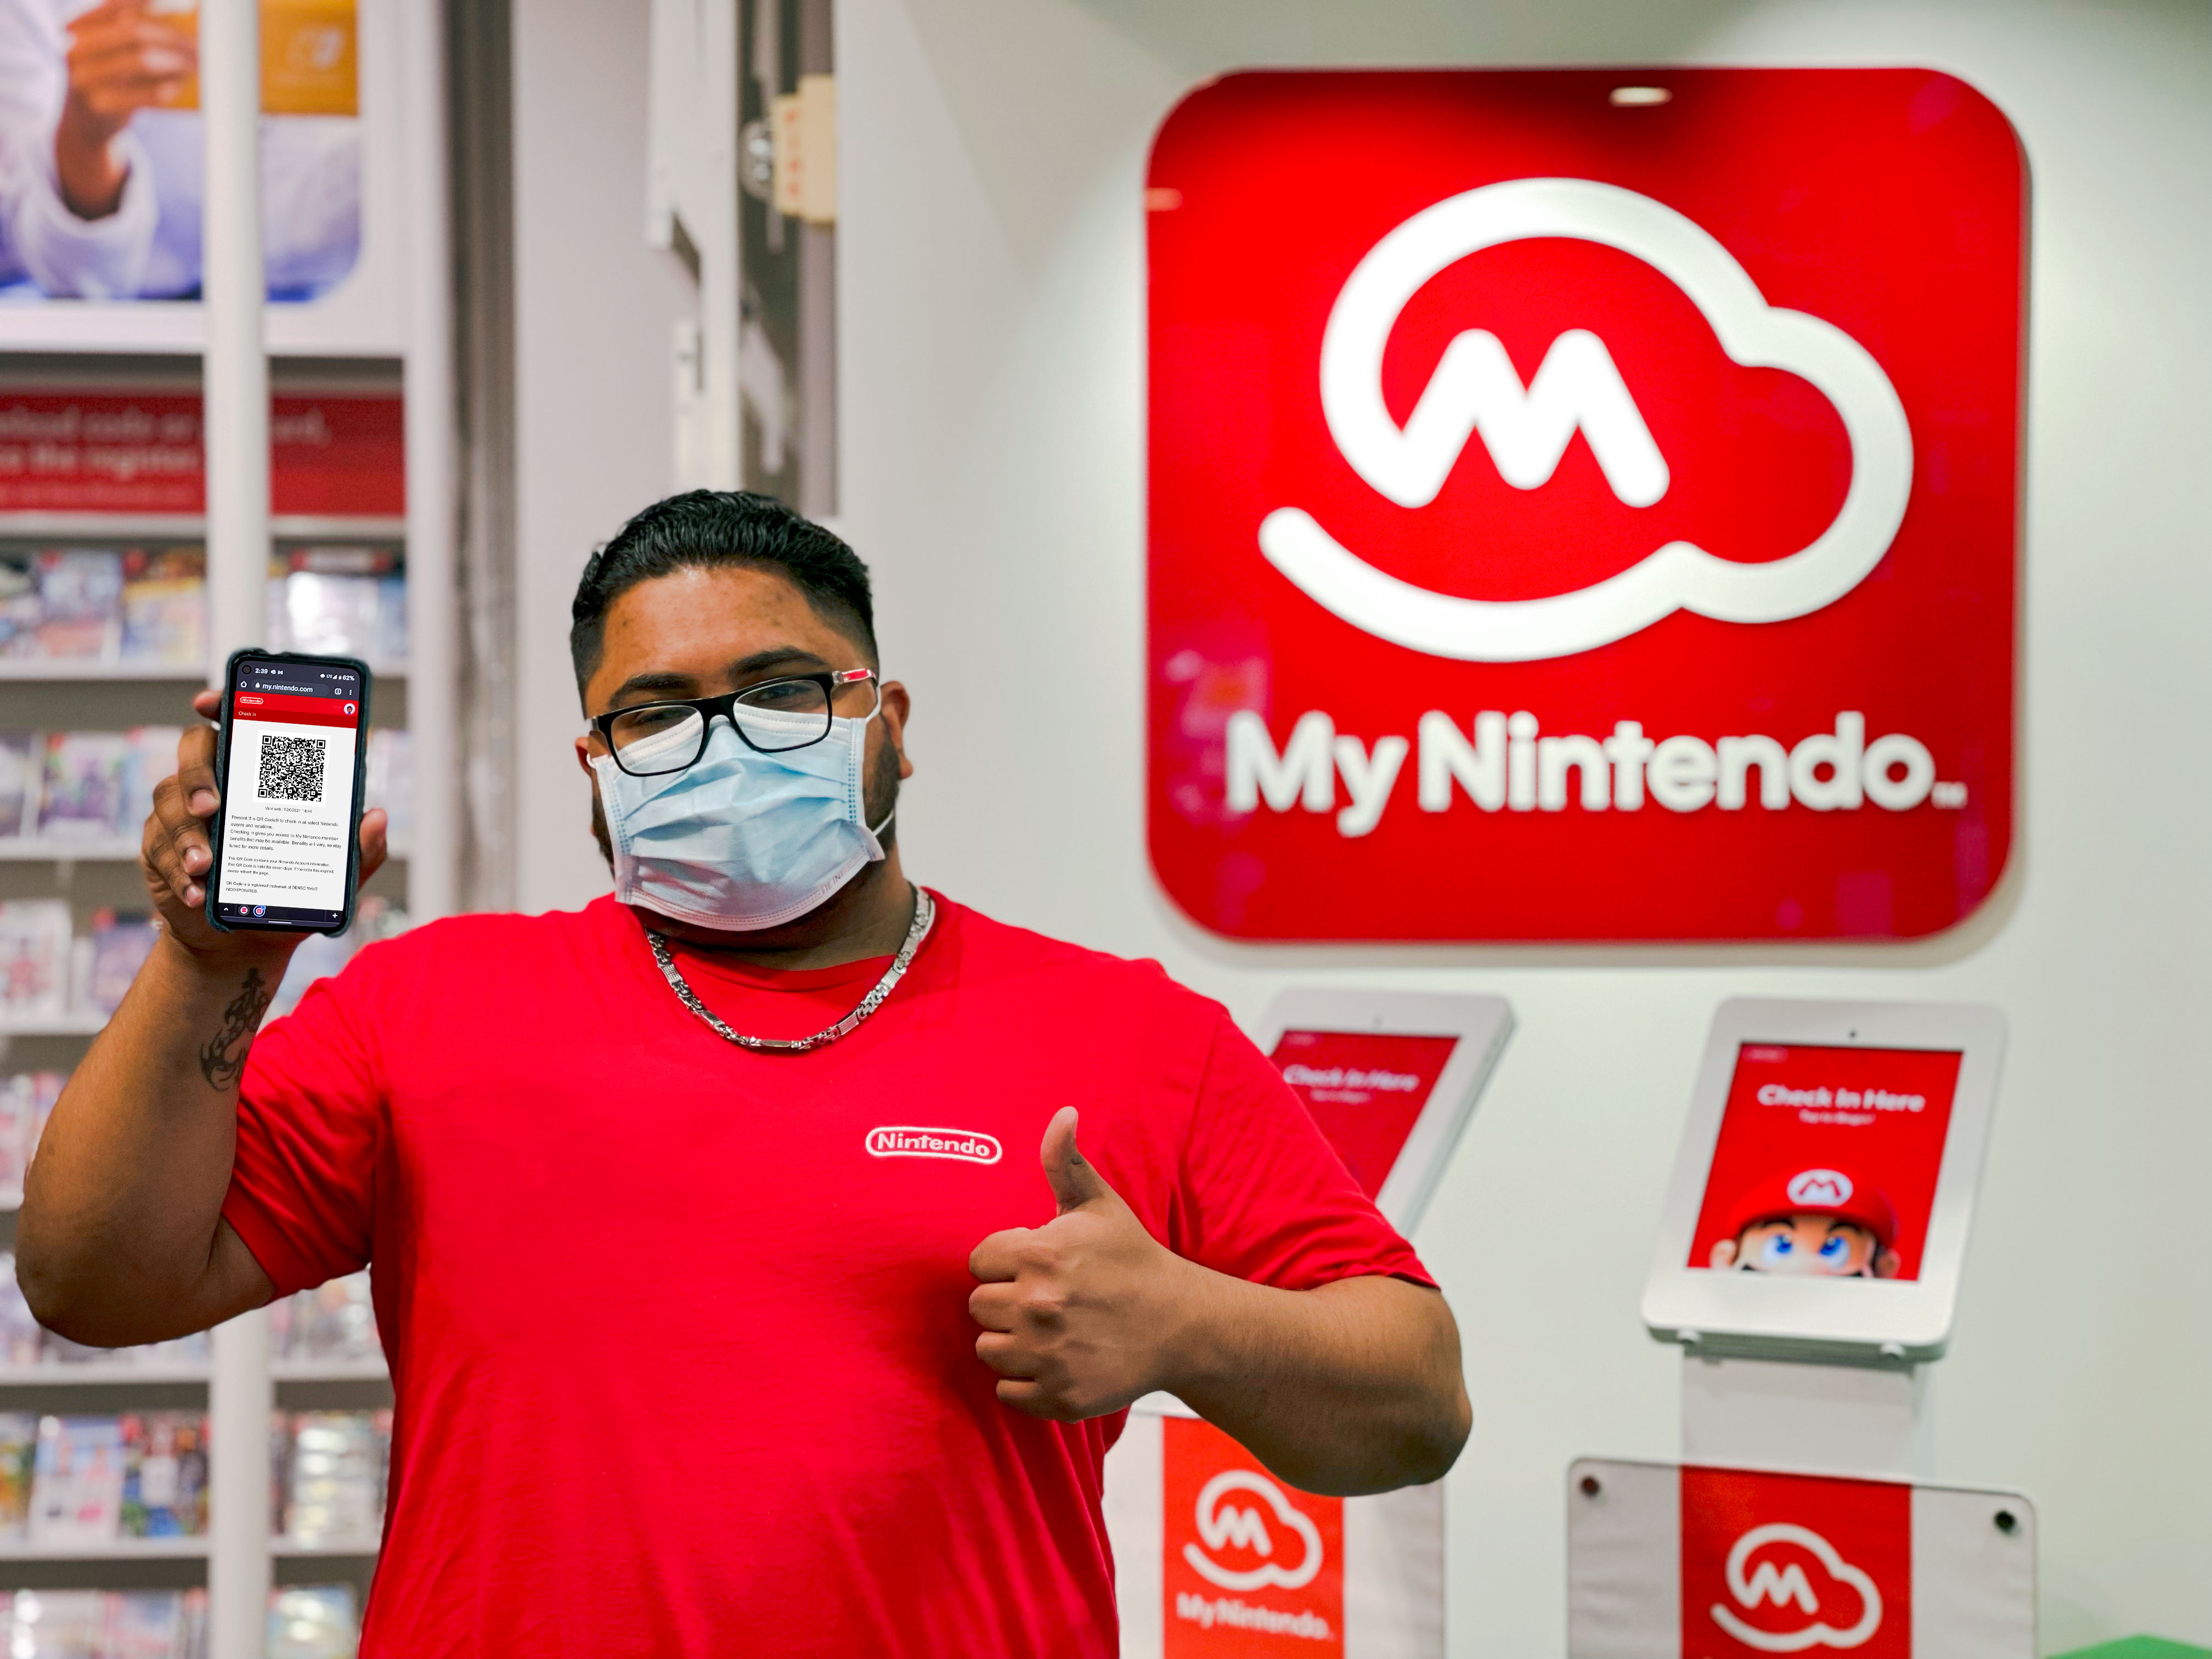 Nintendo Ny What Are Some Perks Of Visiting Nintendo Ny Scan Your Mynintendo Qr Code To Check In With The Kiosk At Nintendonyc Receive 100 My Nintendo Platinum Points That Can